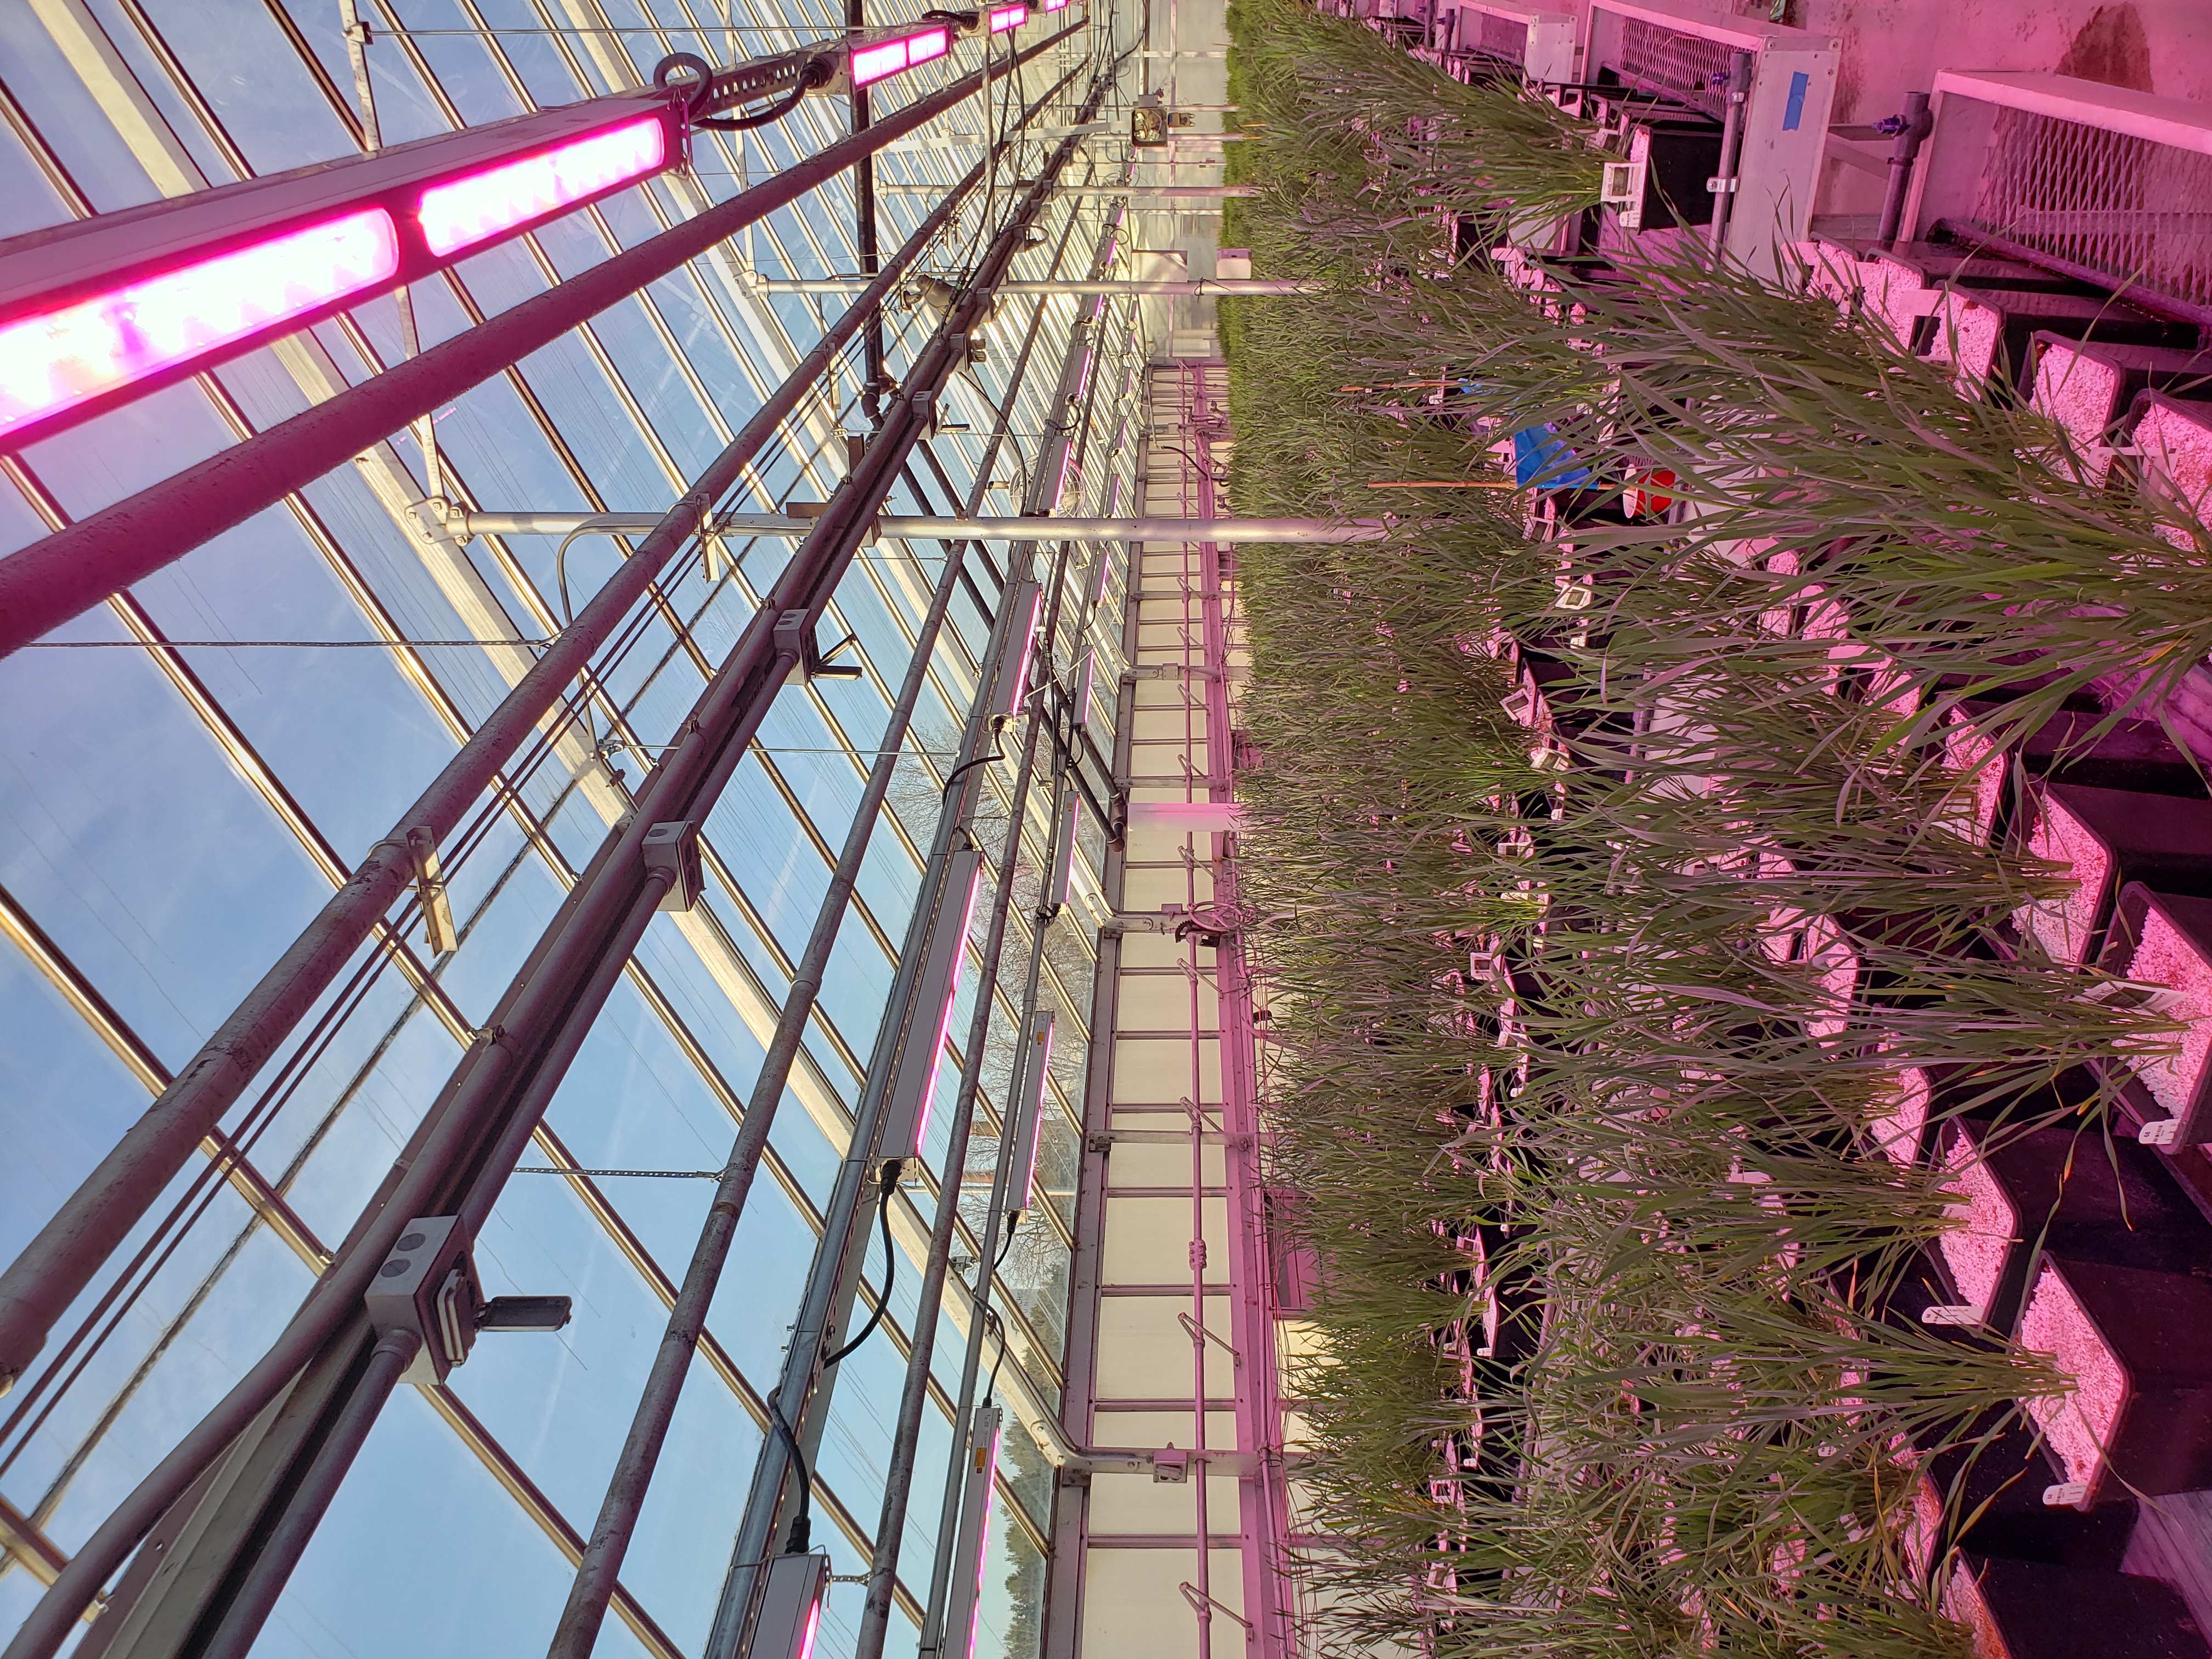 LED lighting in updated greenhouses